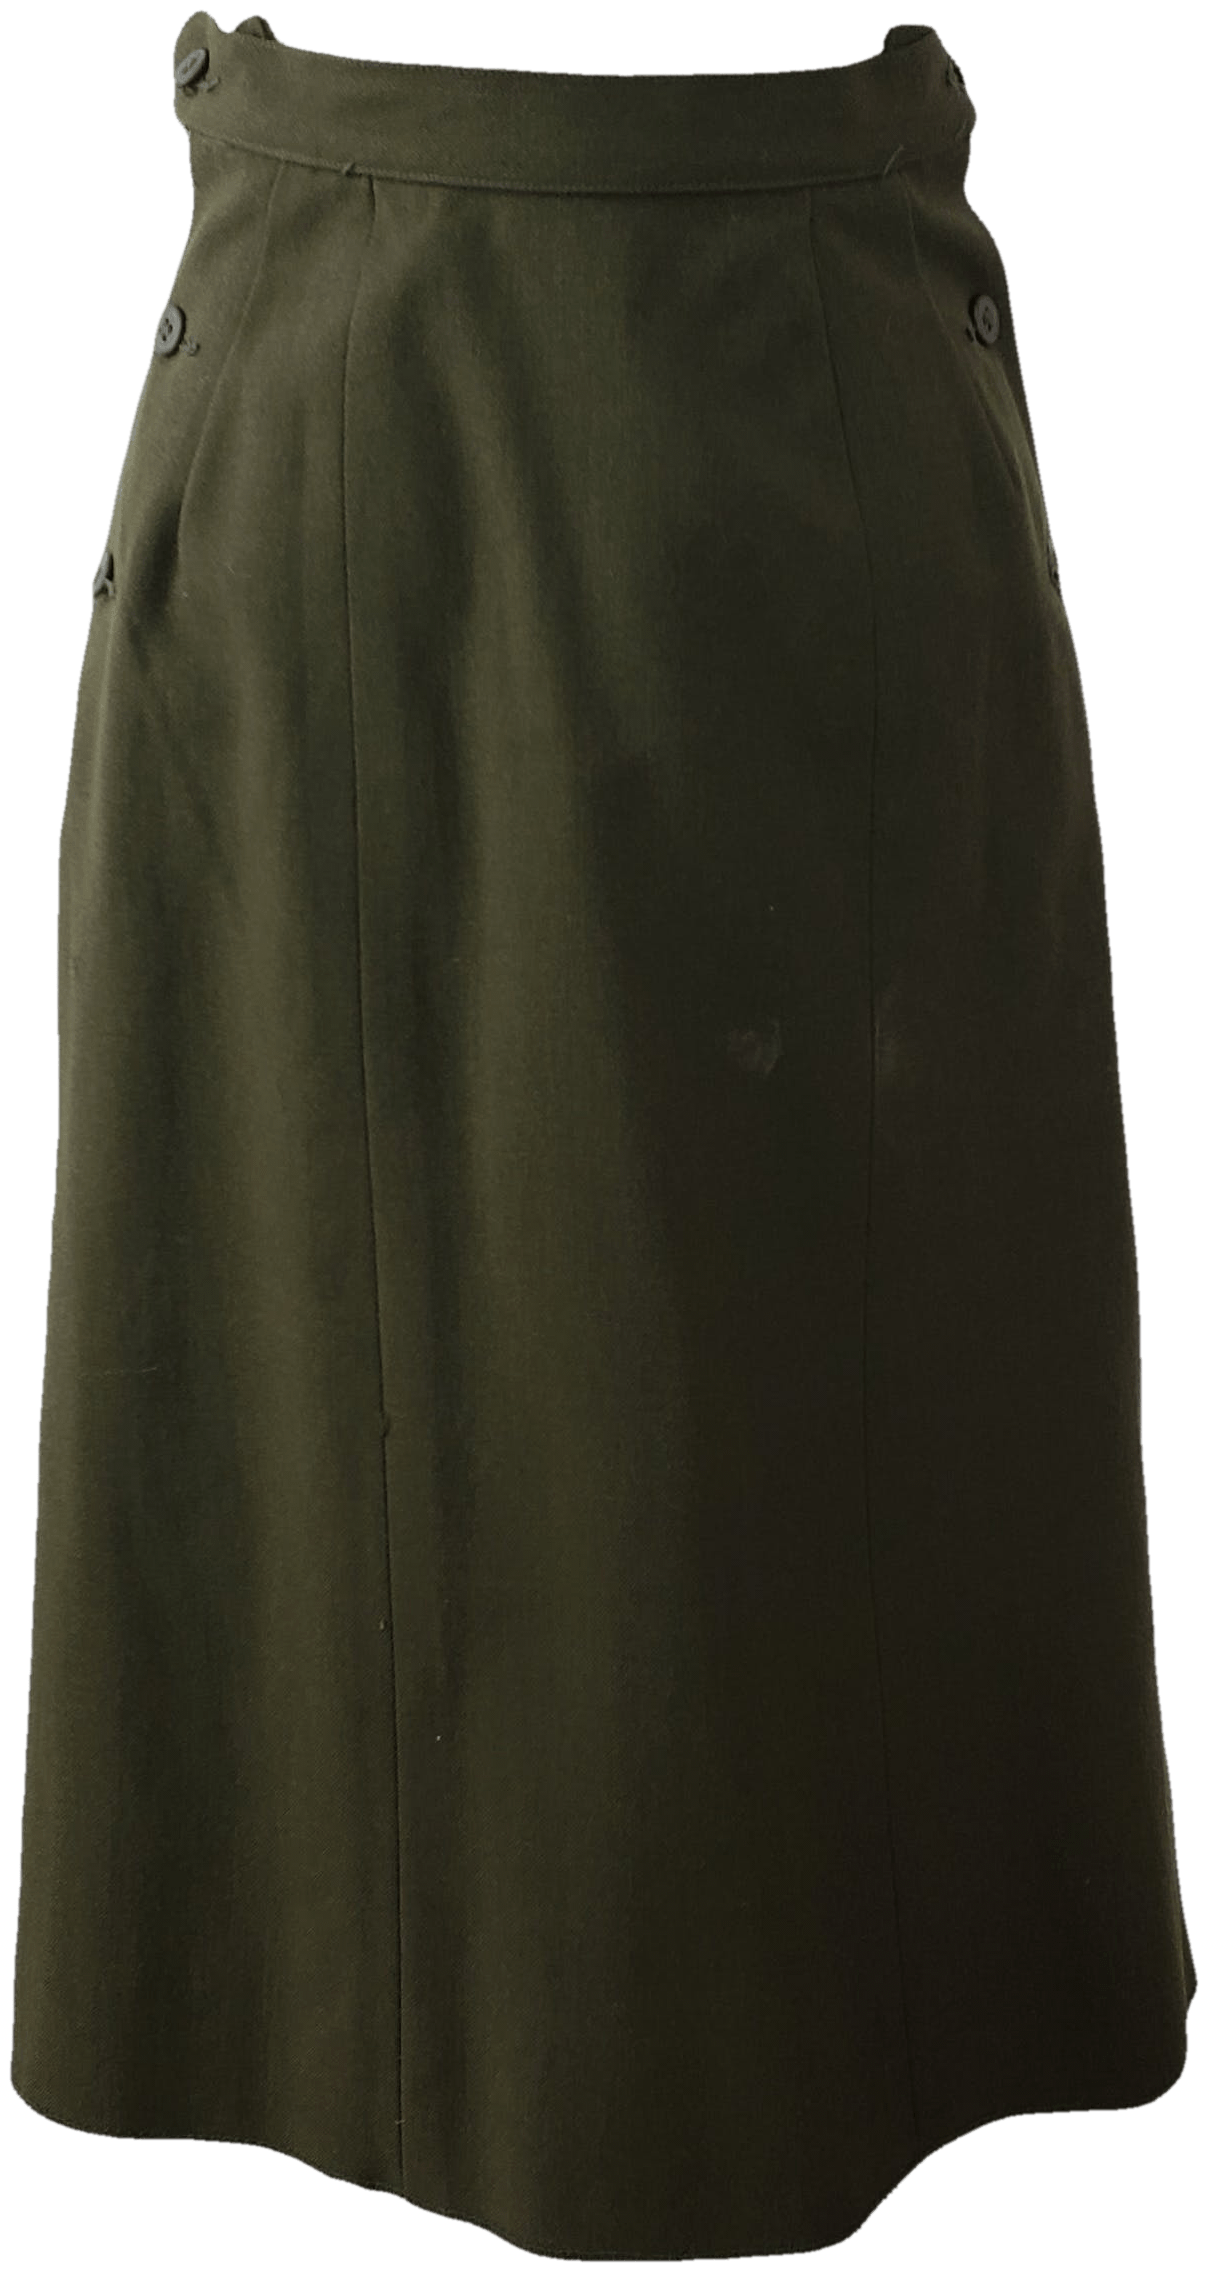 Vintage Wool Army Green Skirt With Side Button Closure | Shop THRILLING